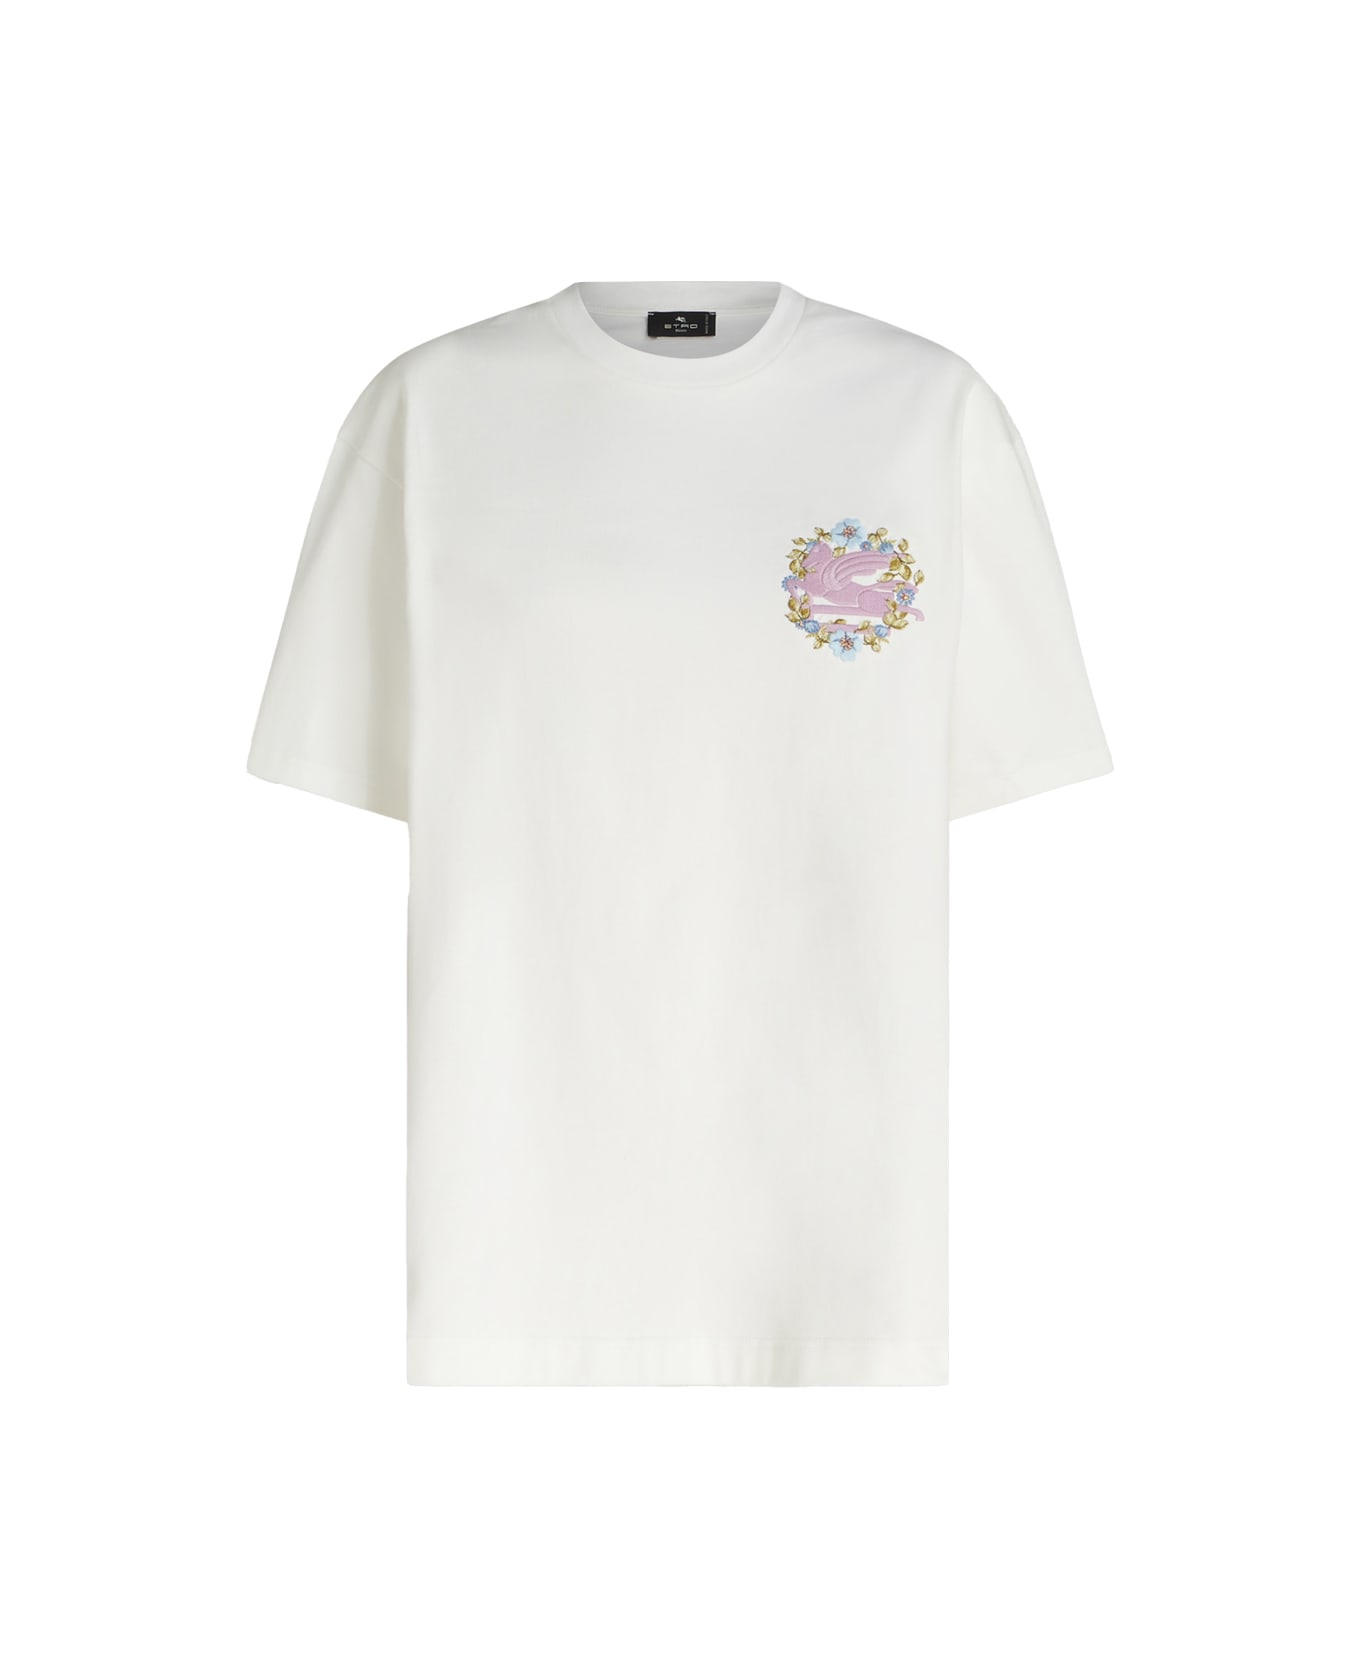 Etro White T-shirt With Embroidery - White